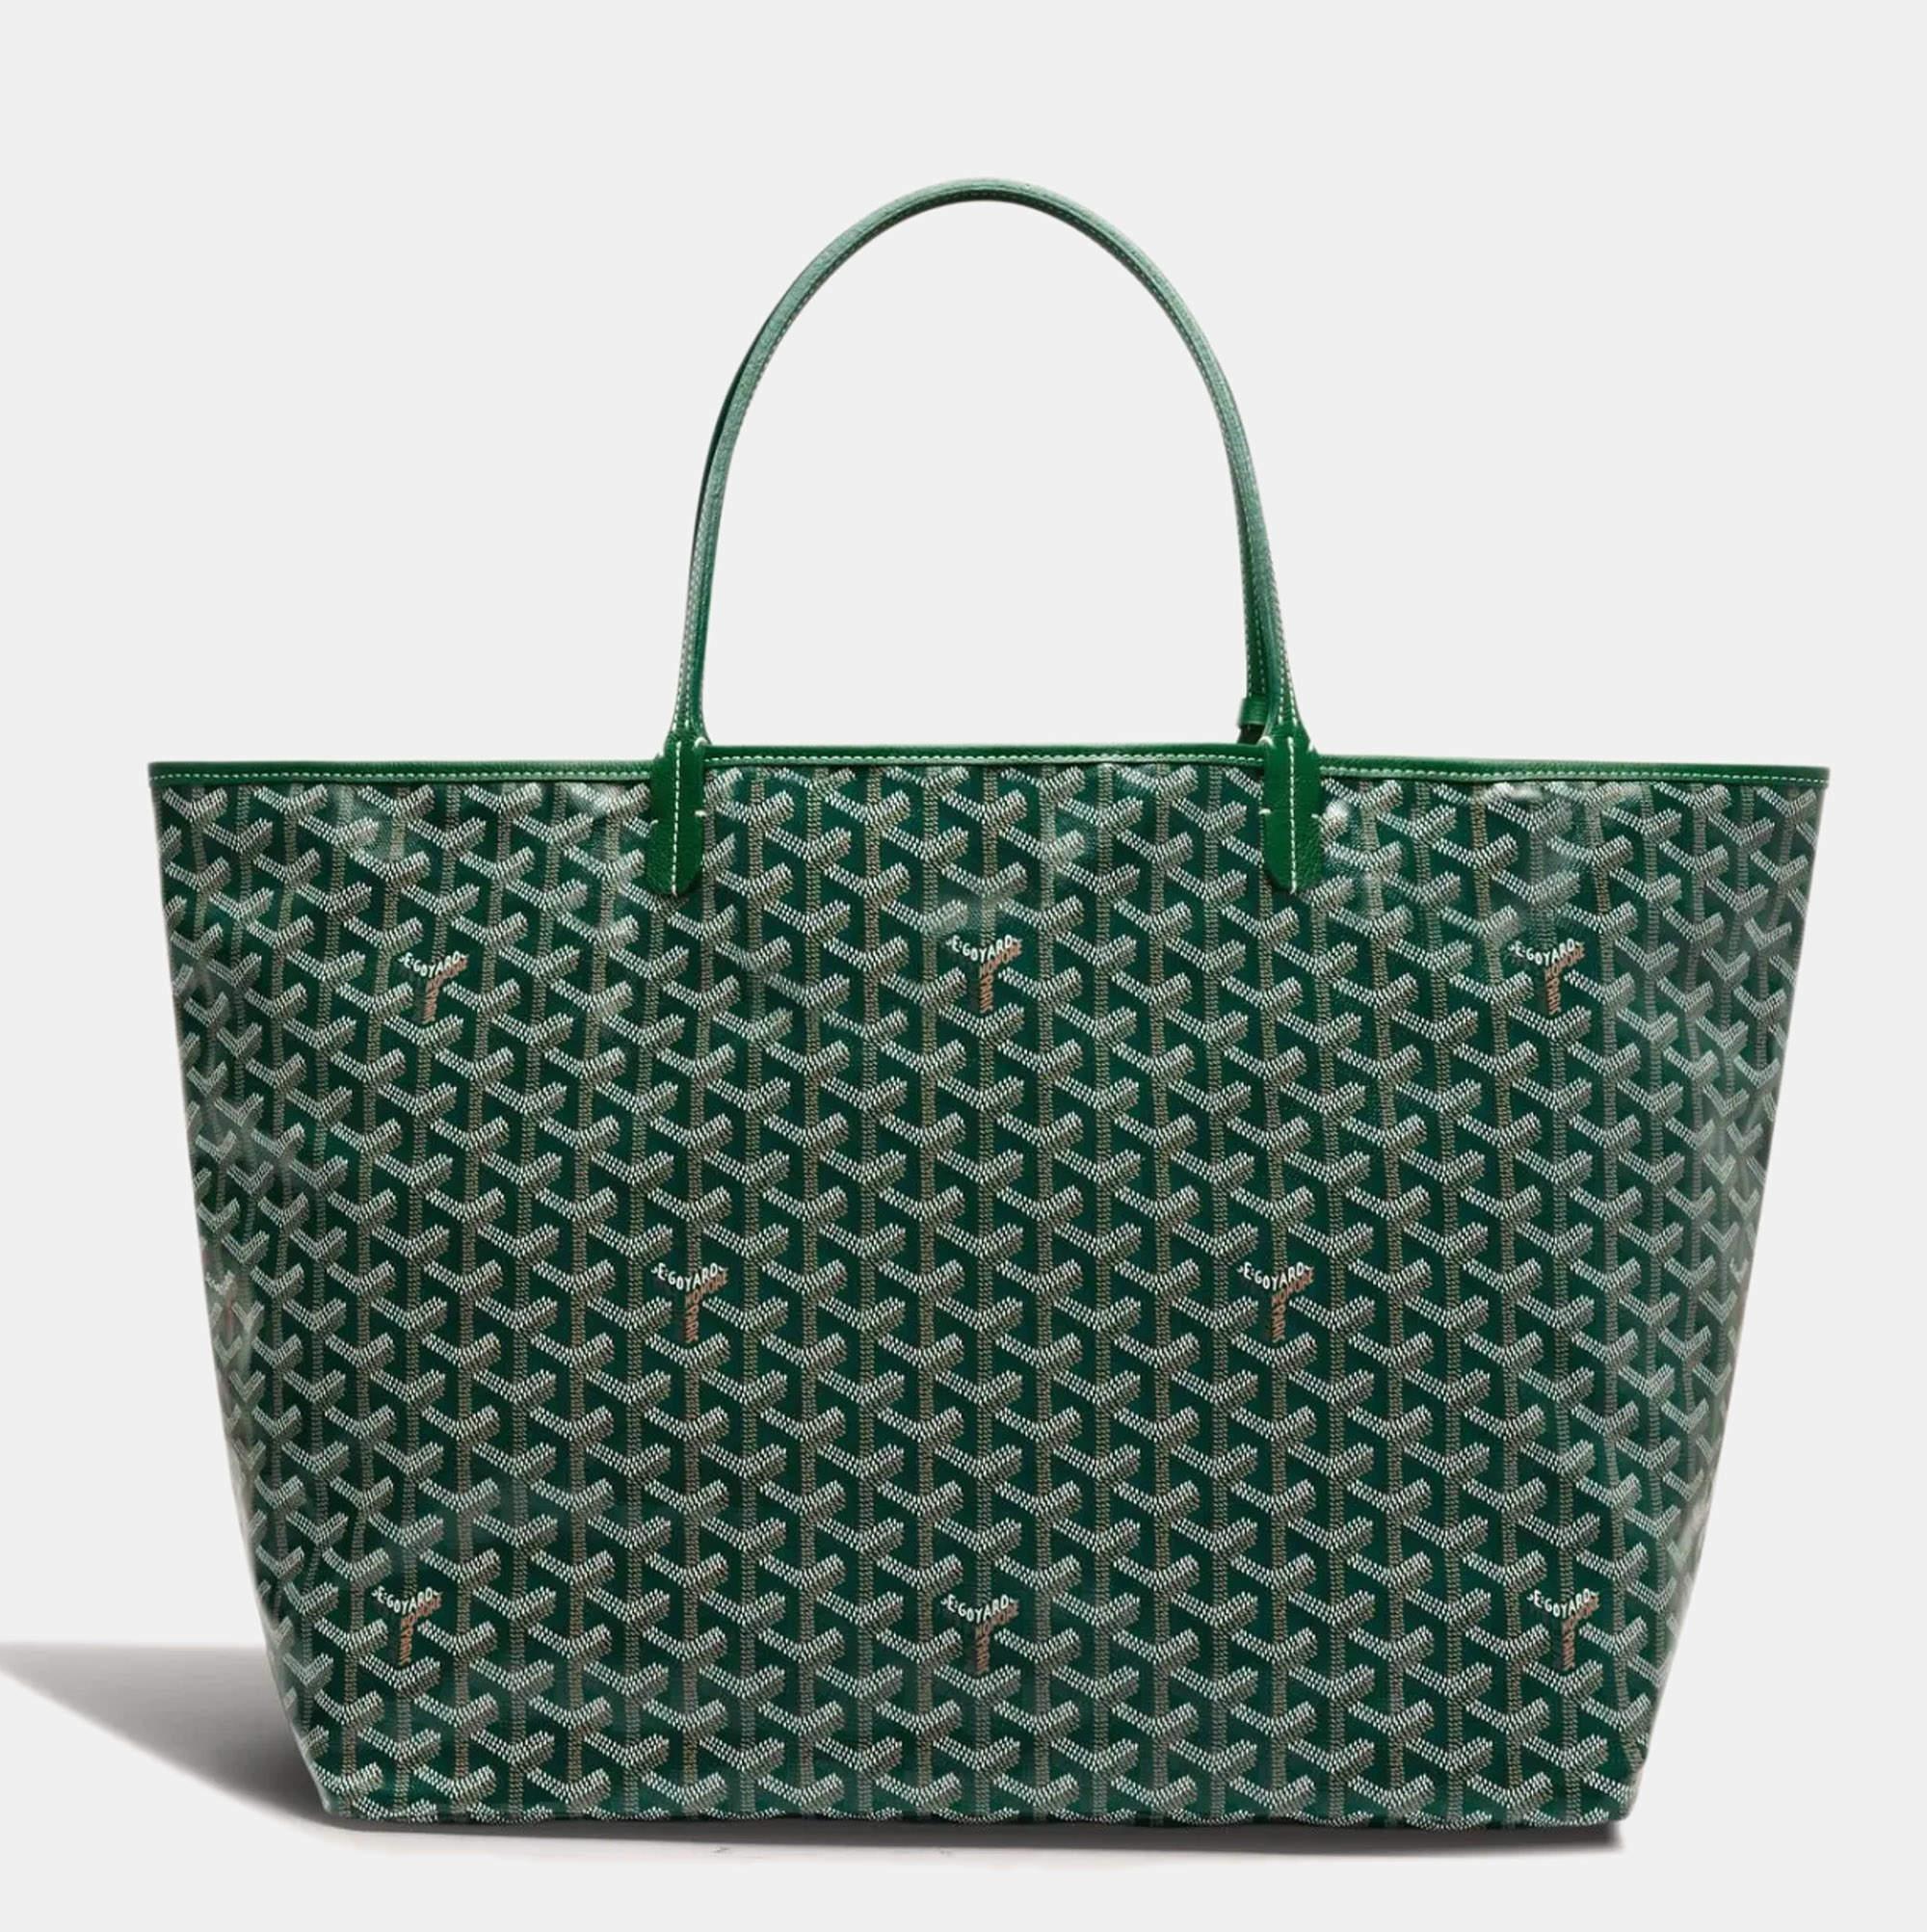 The Saint Louis tote is a Goyard icon that is perfectly made to accompany you every day. It is a testament to high quality, durability, and classic appeal.

Includes: Dust bag with Goyard shopping paper bag

